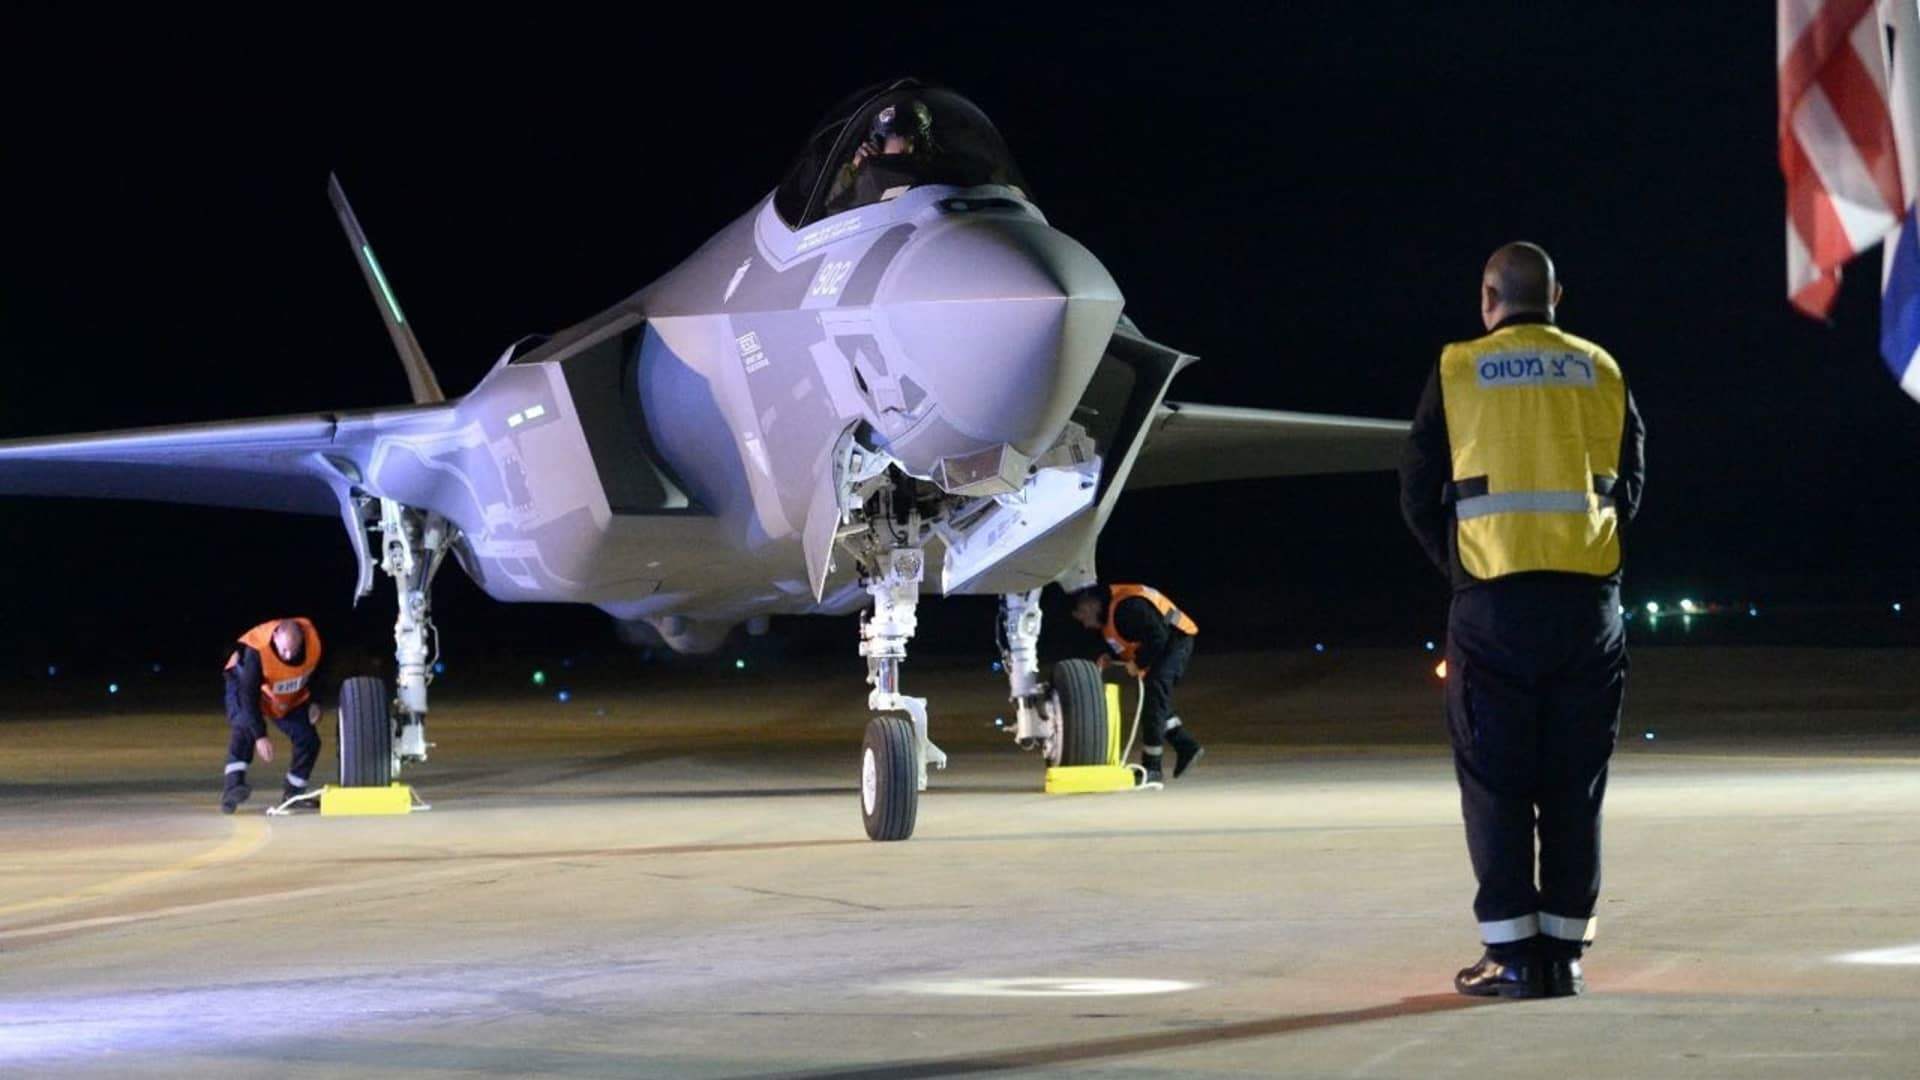 Israel approves buying 25 new F-35 stealth fighter jets: ministry